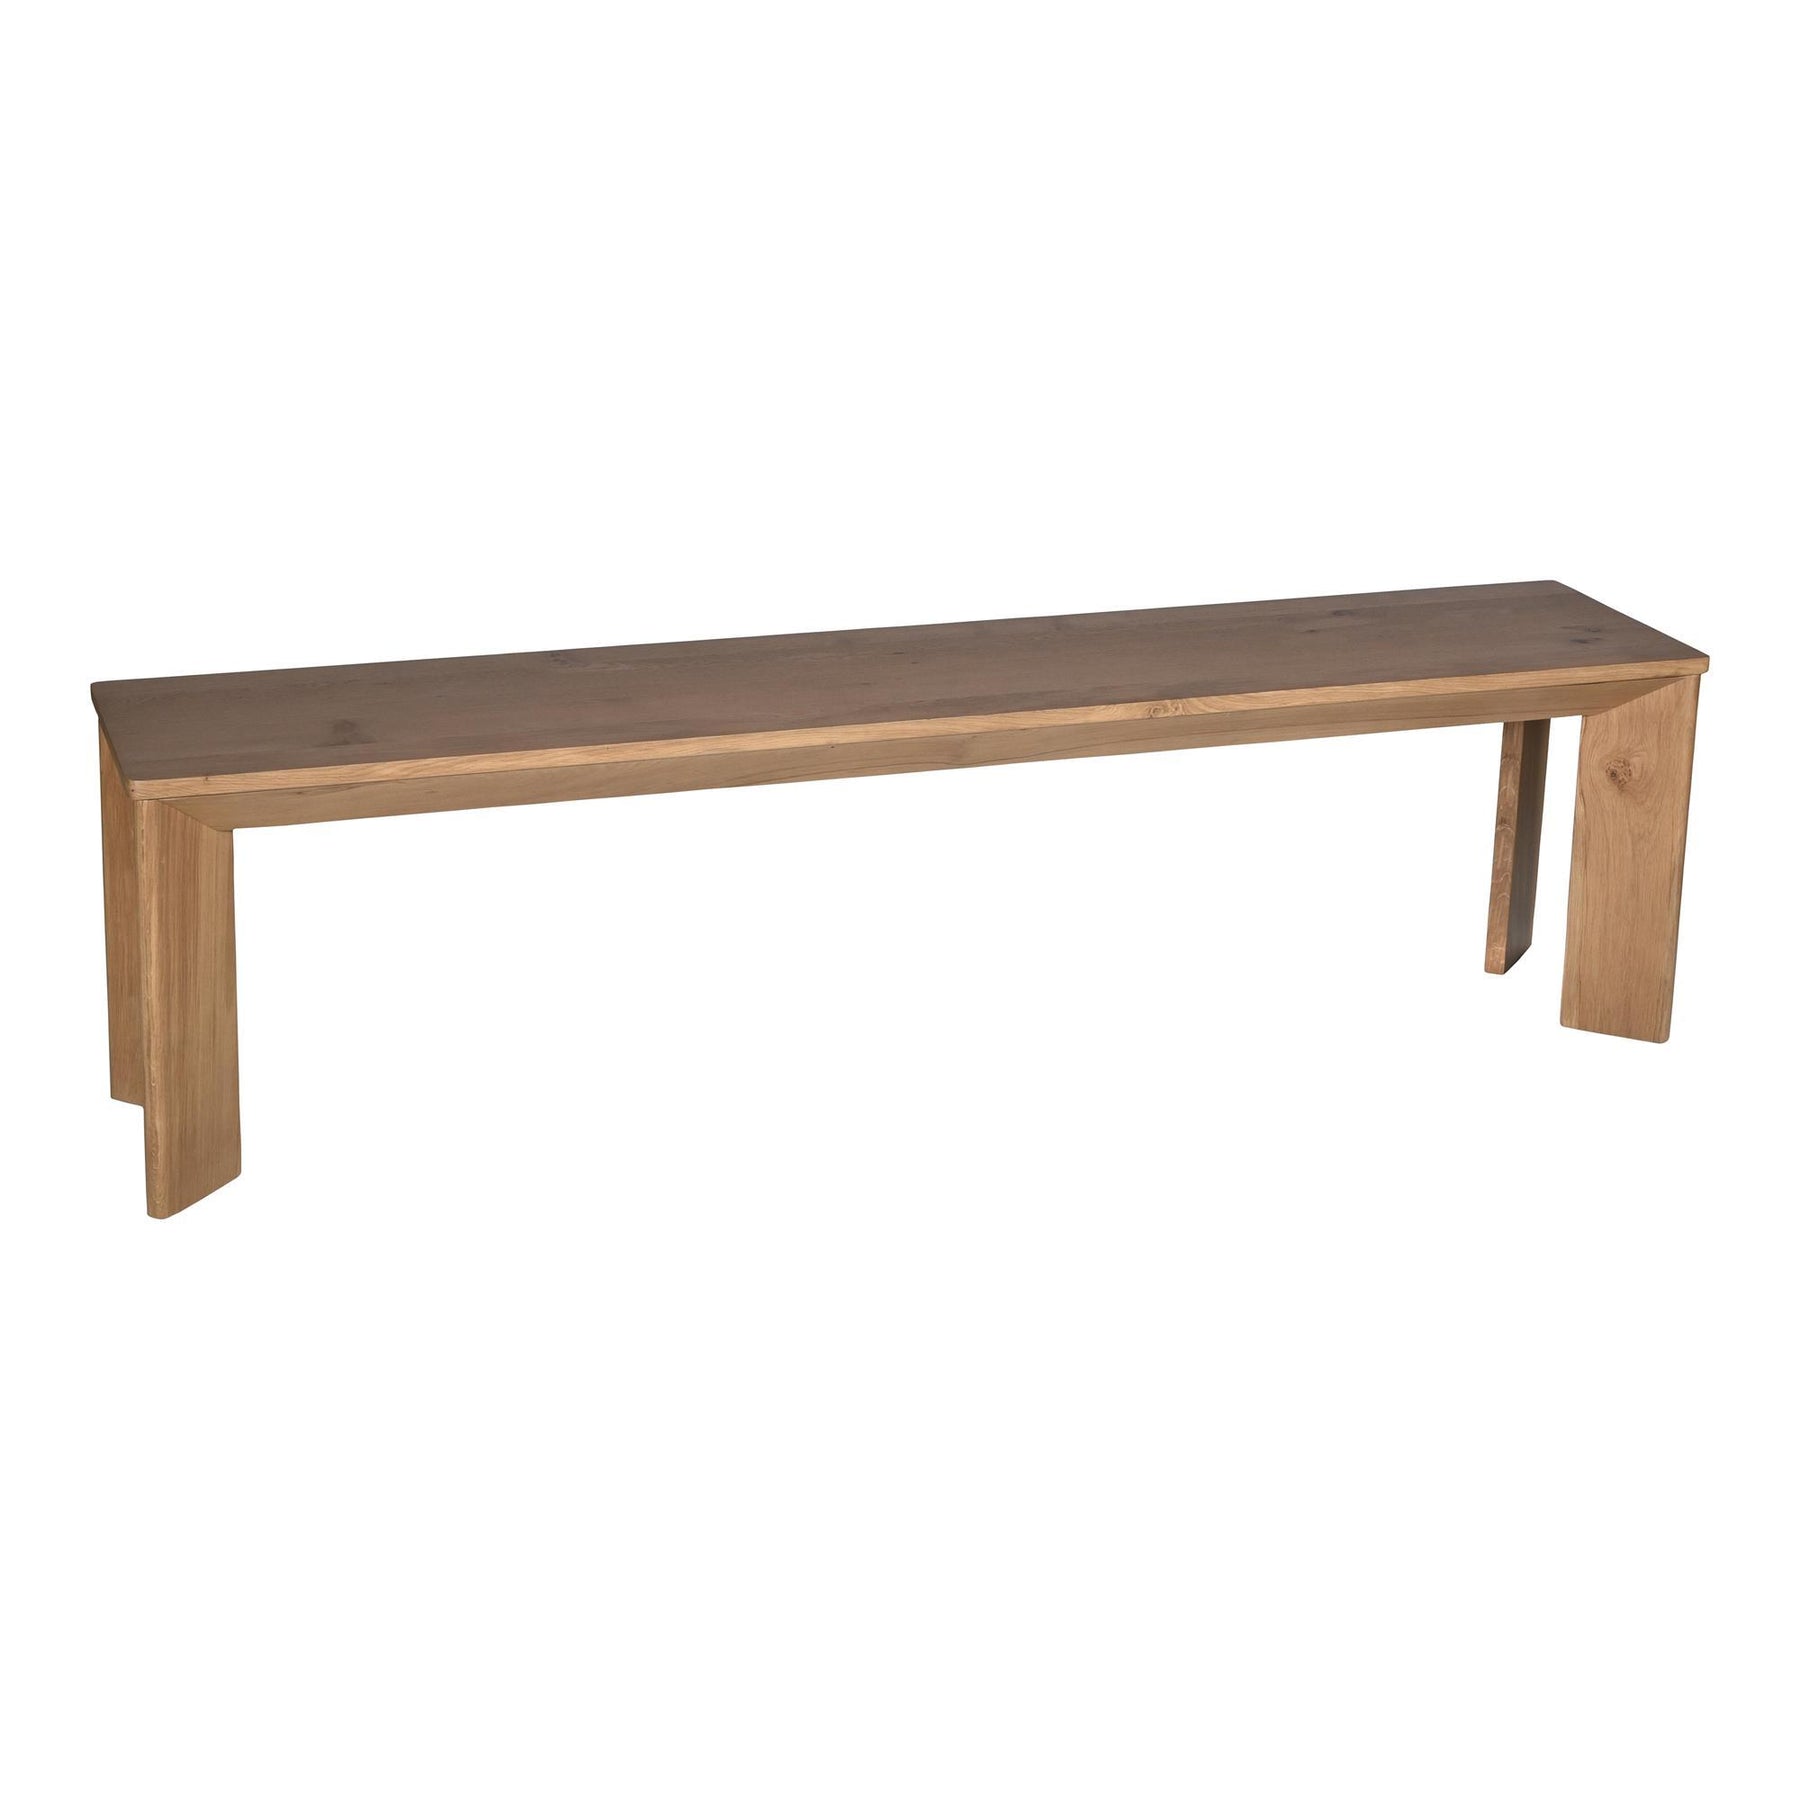 Moe's Home Collection Angle Oak Dining Bench Large - RP-1025-24